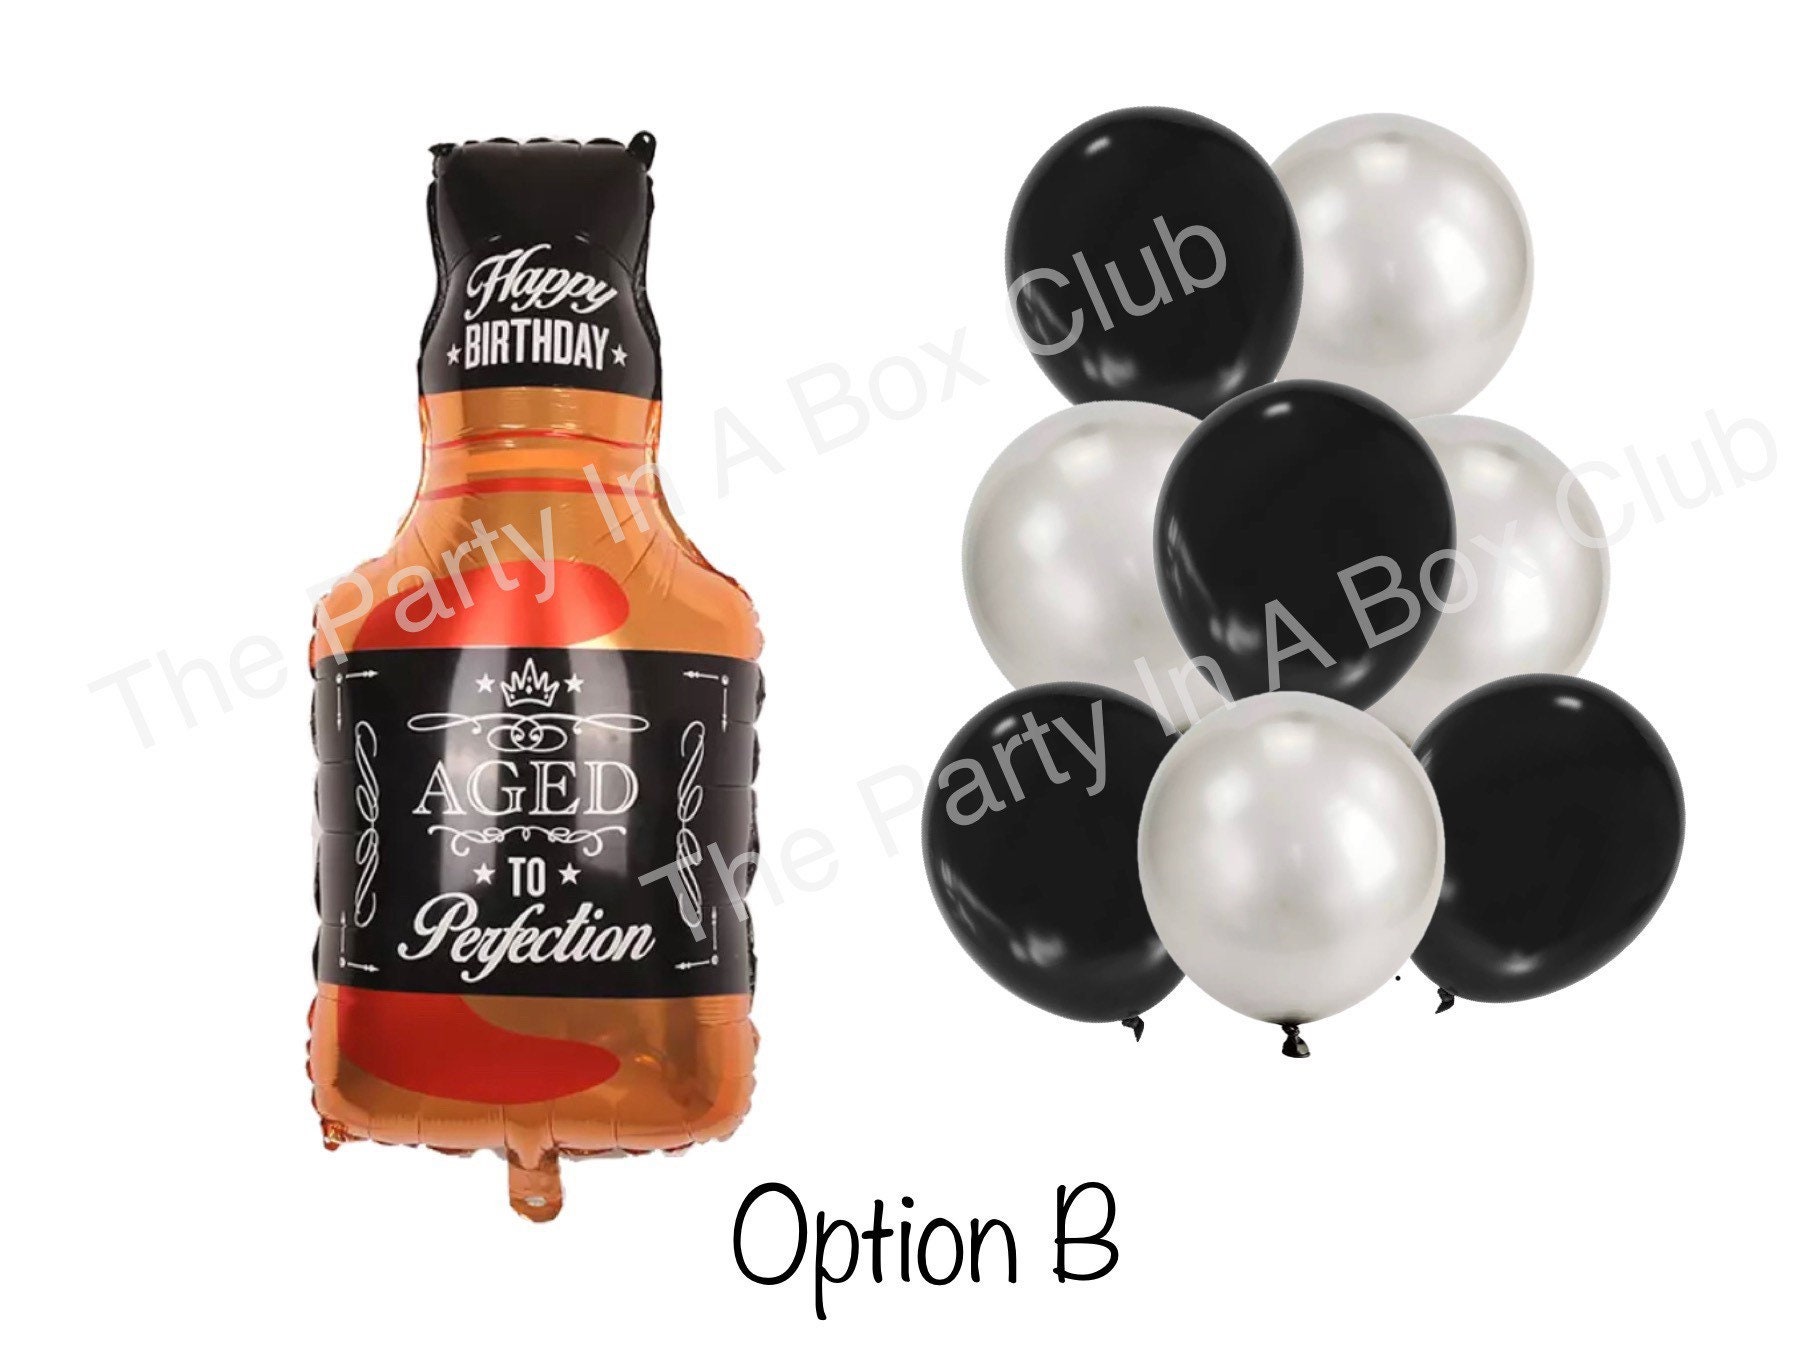 Whisky Birthday Party Supplies Kit, Whisky Party Decoration Kit, Whisky  Balloon Decorations Set, Aged to Perfection Birthday Party Garland, White &  Black Balloons to Perfection Party Supplies 